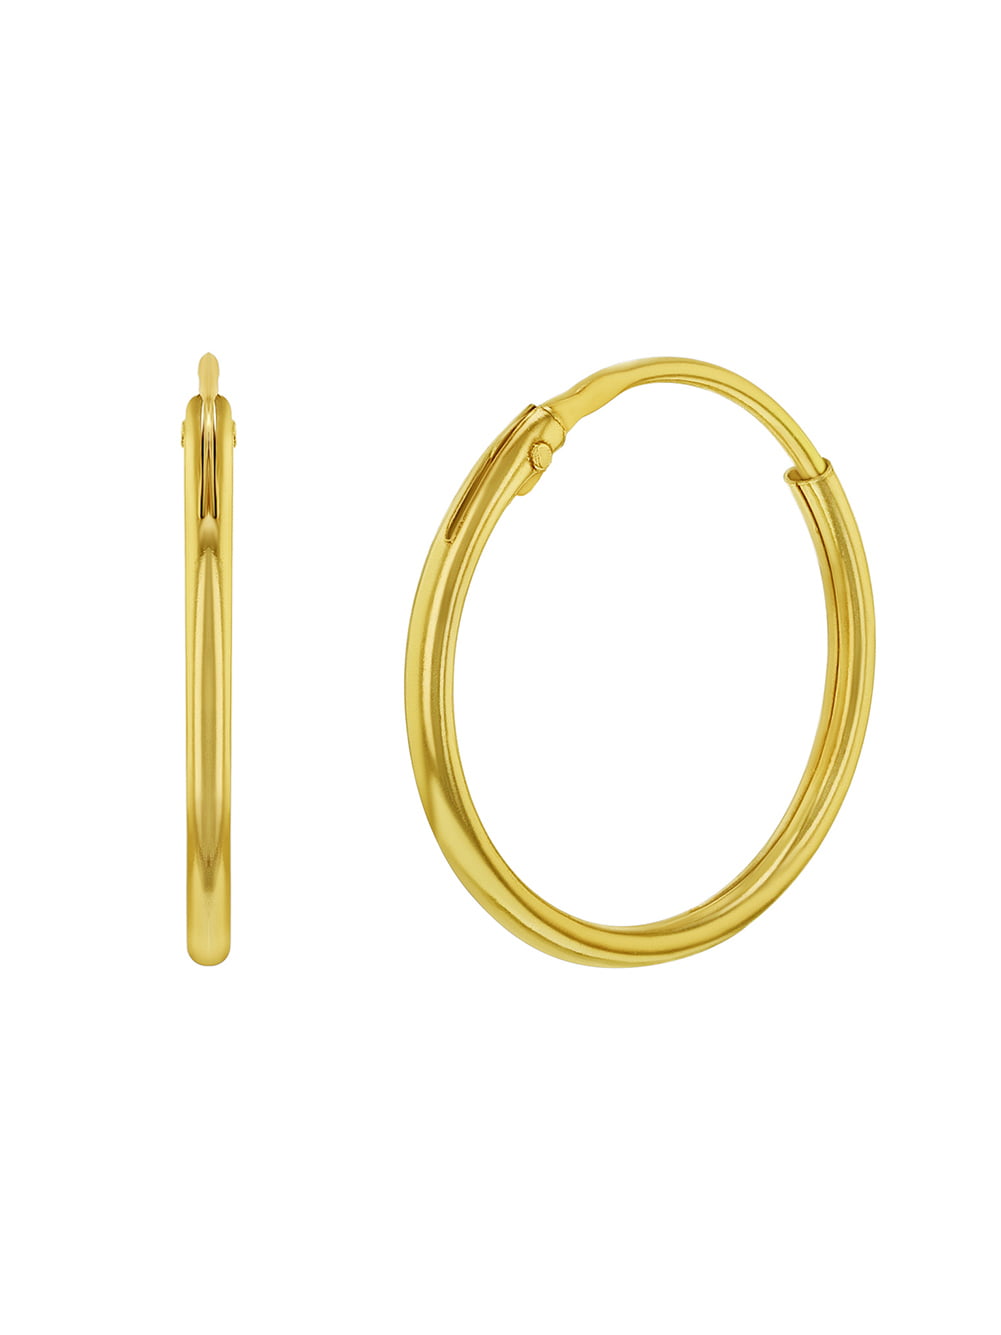 In Season Jewelry - 14k Yellow Gold Plain Polished Small Endless Hoop ...